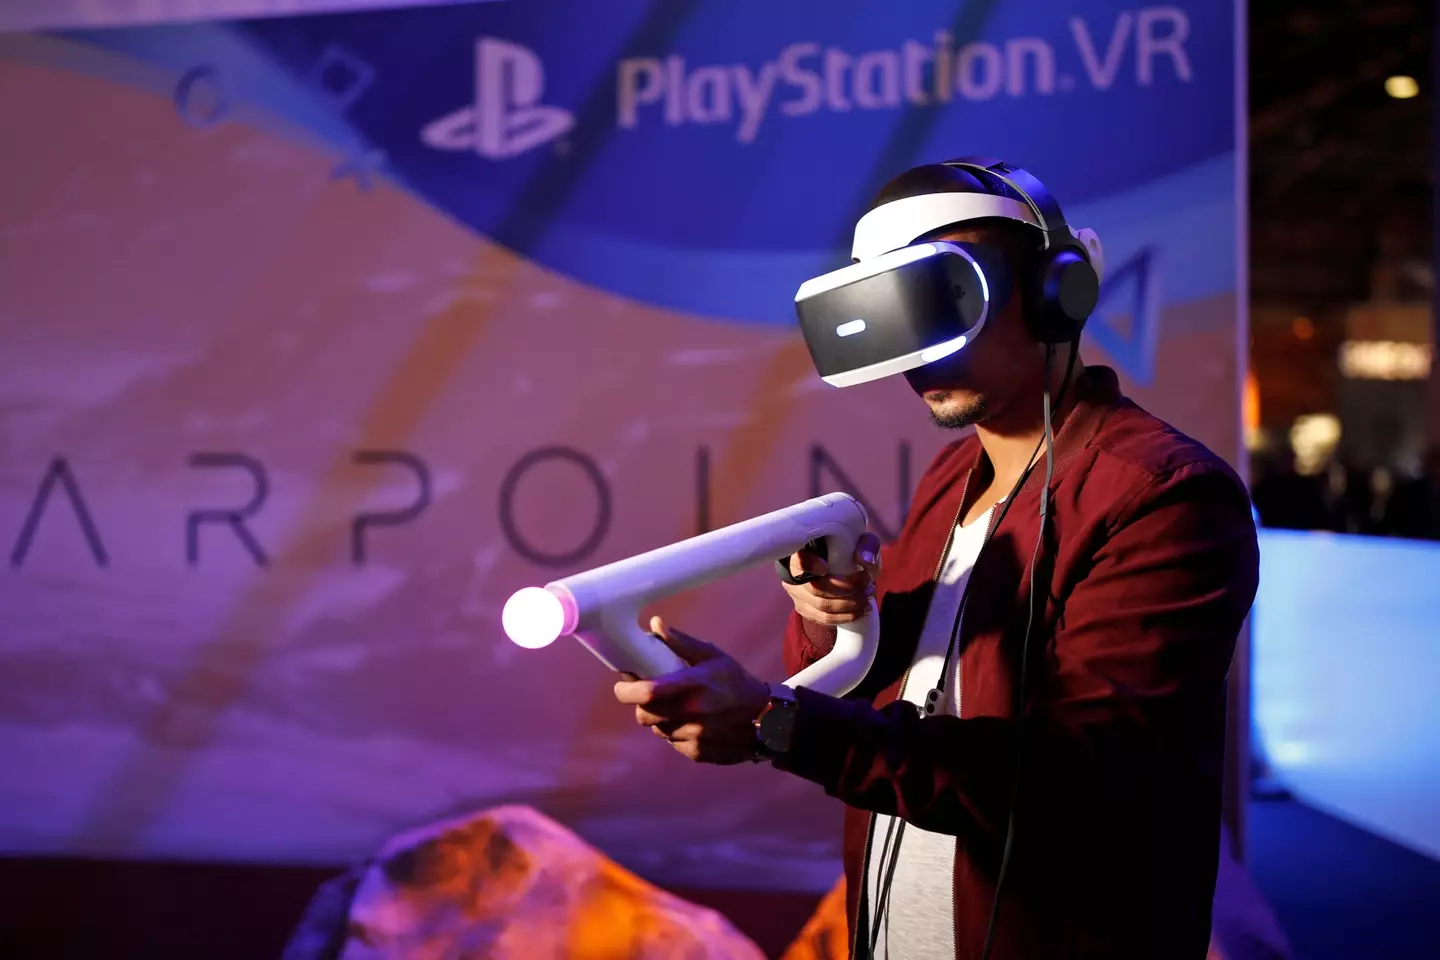 Sony is working on a second generation PlayStation VR device.